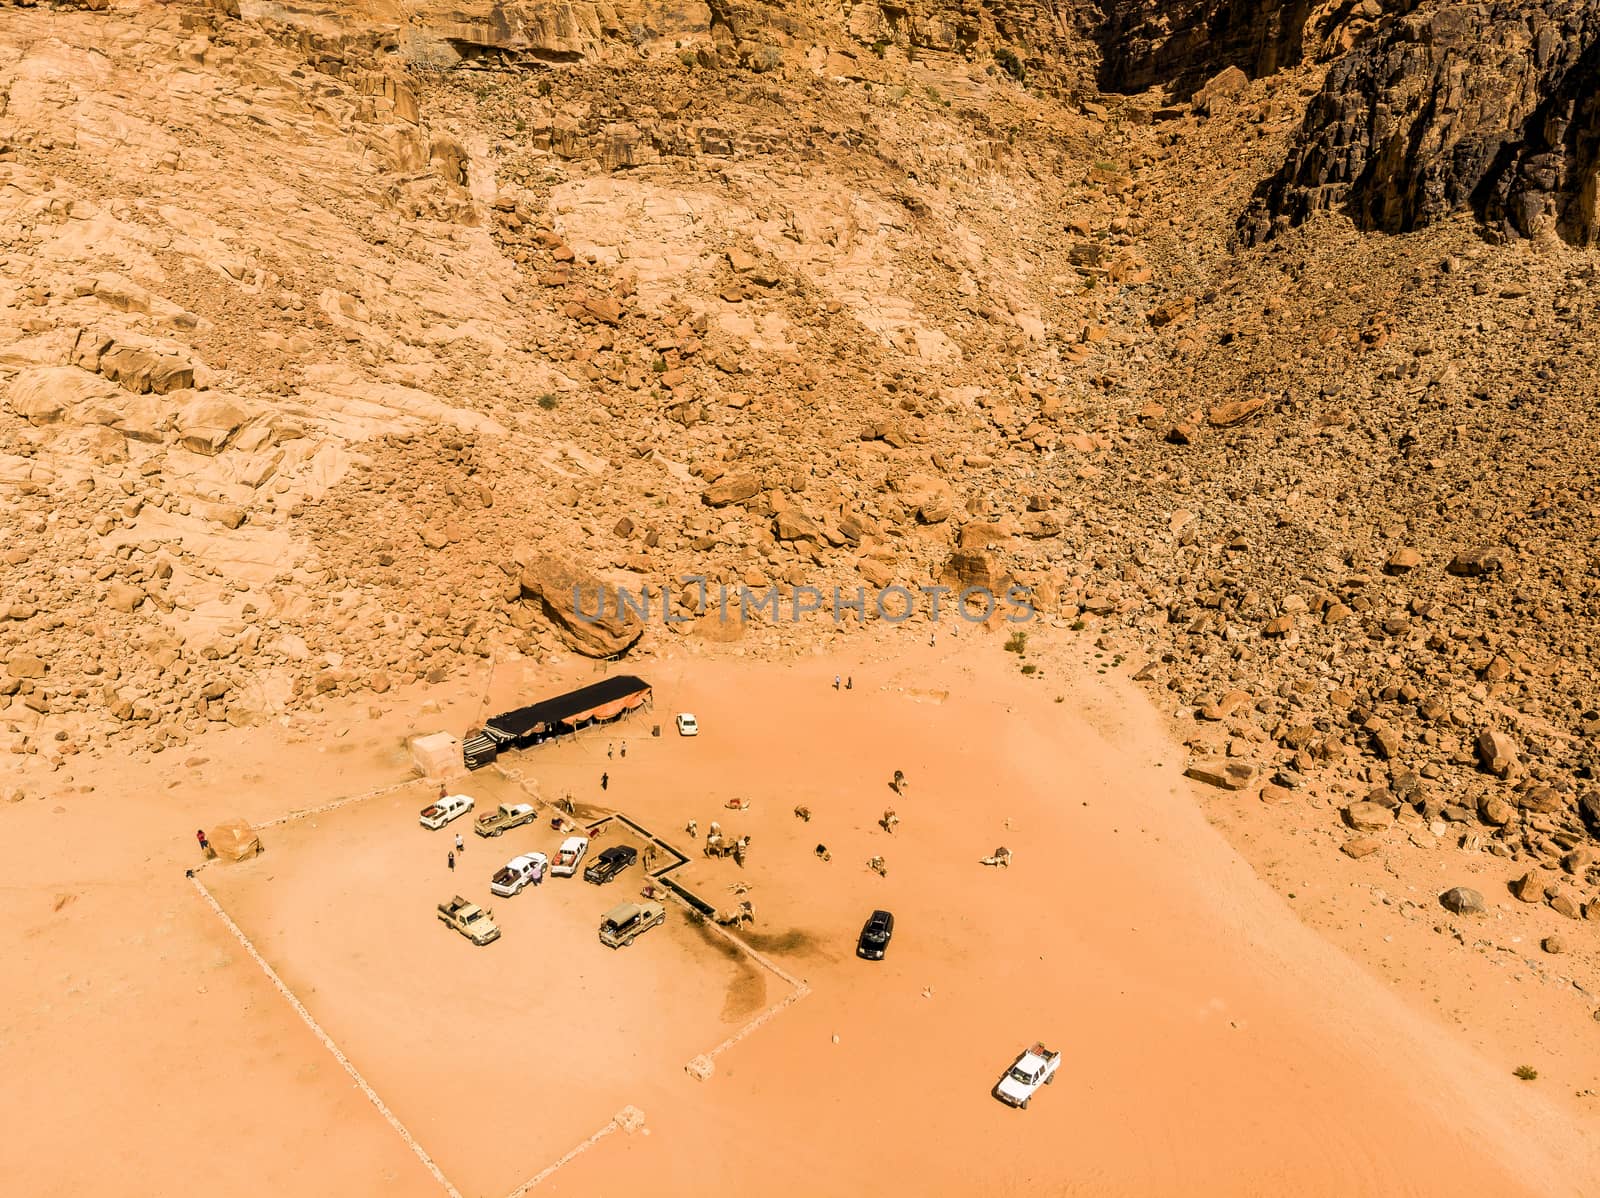 Aerial view of the Lawrence spring in the Jordanian desert near Wadi Rum by geogif